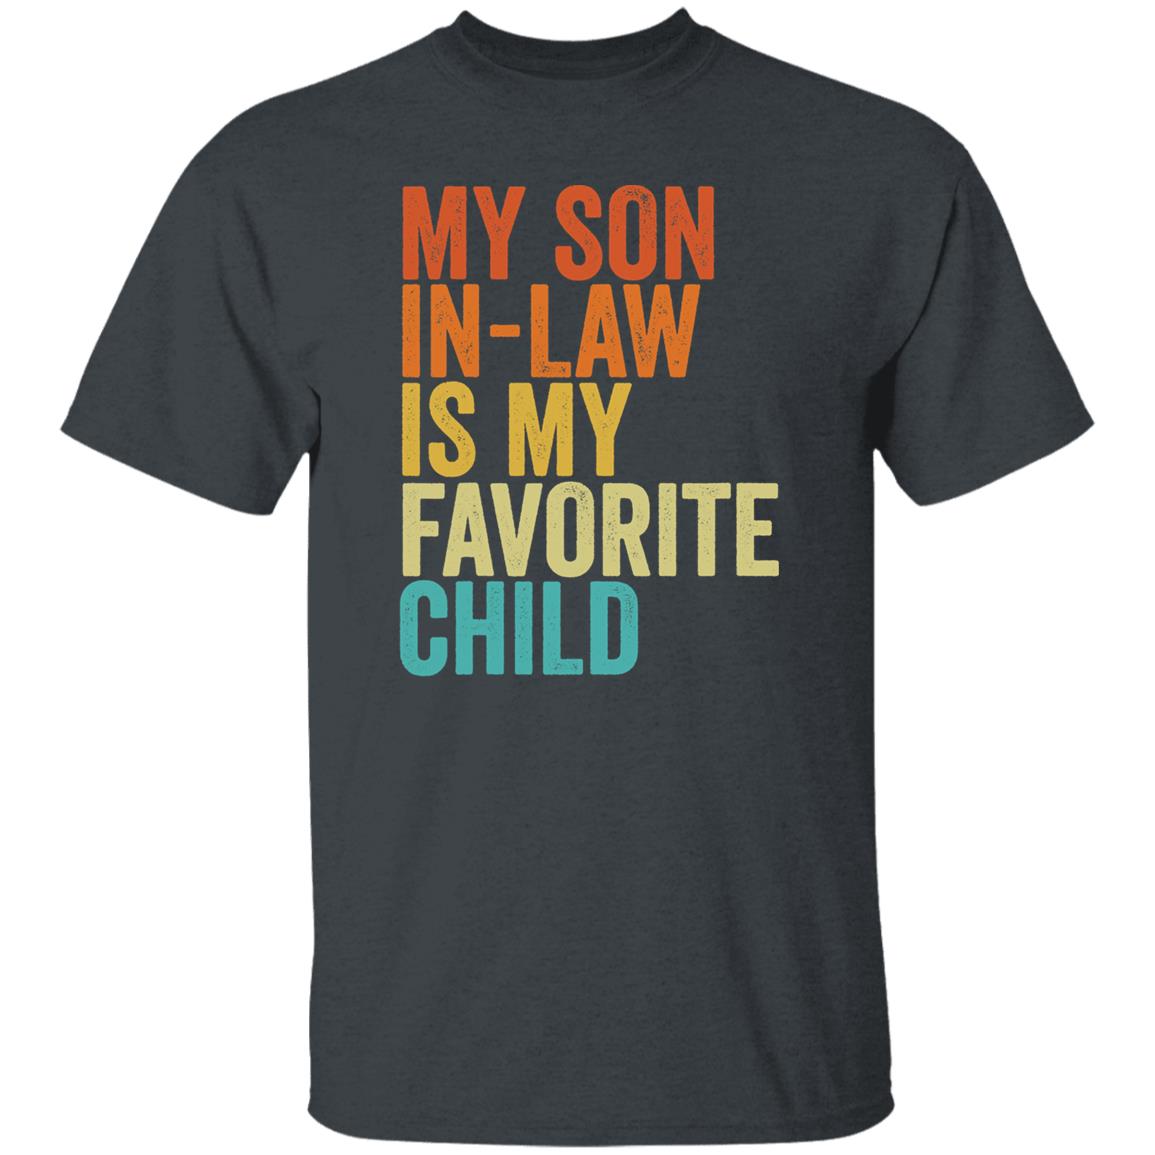 My Son In Law Is My Favorite Child Funny Family Humor Shirt